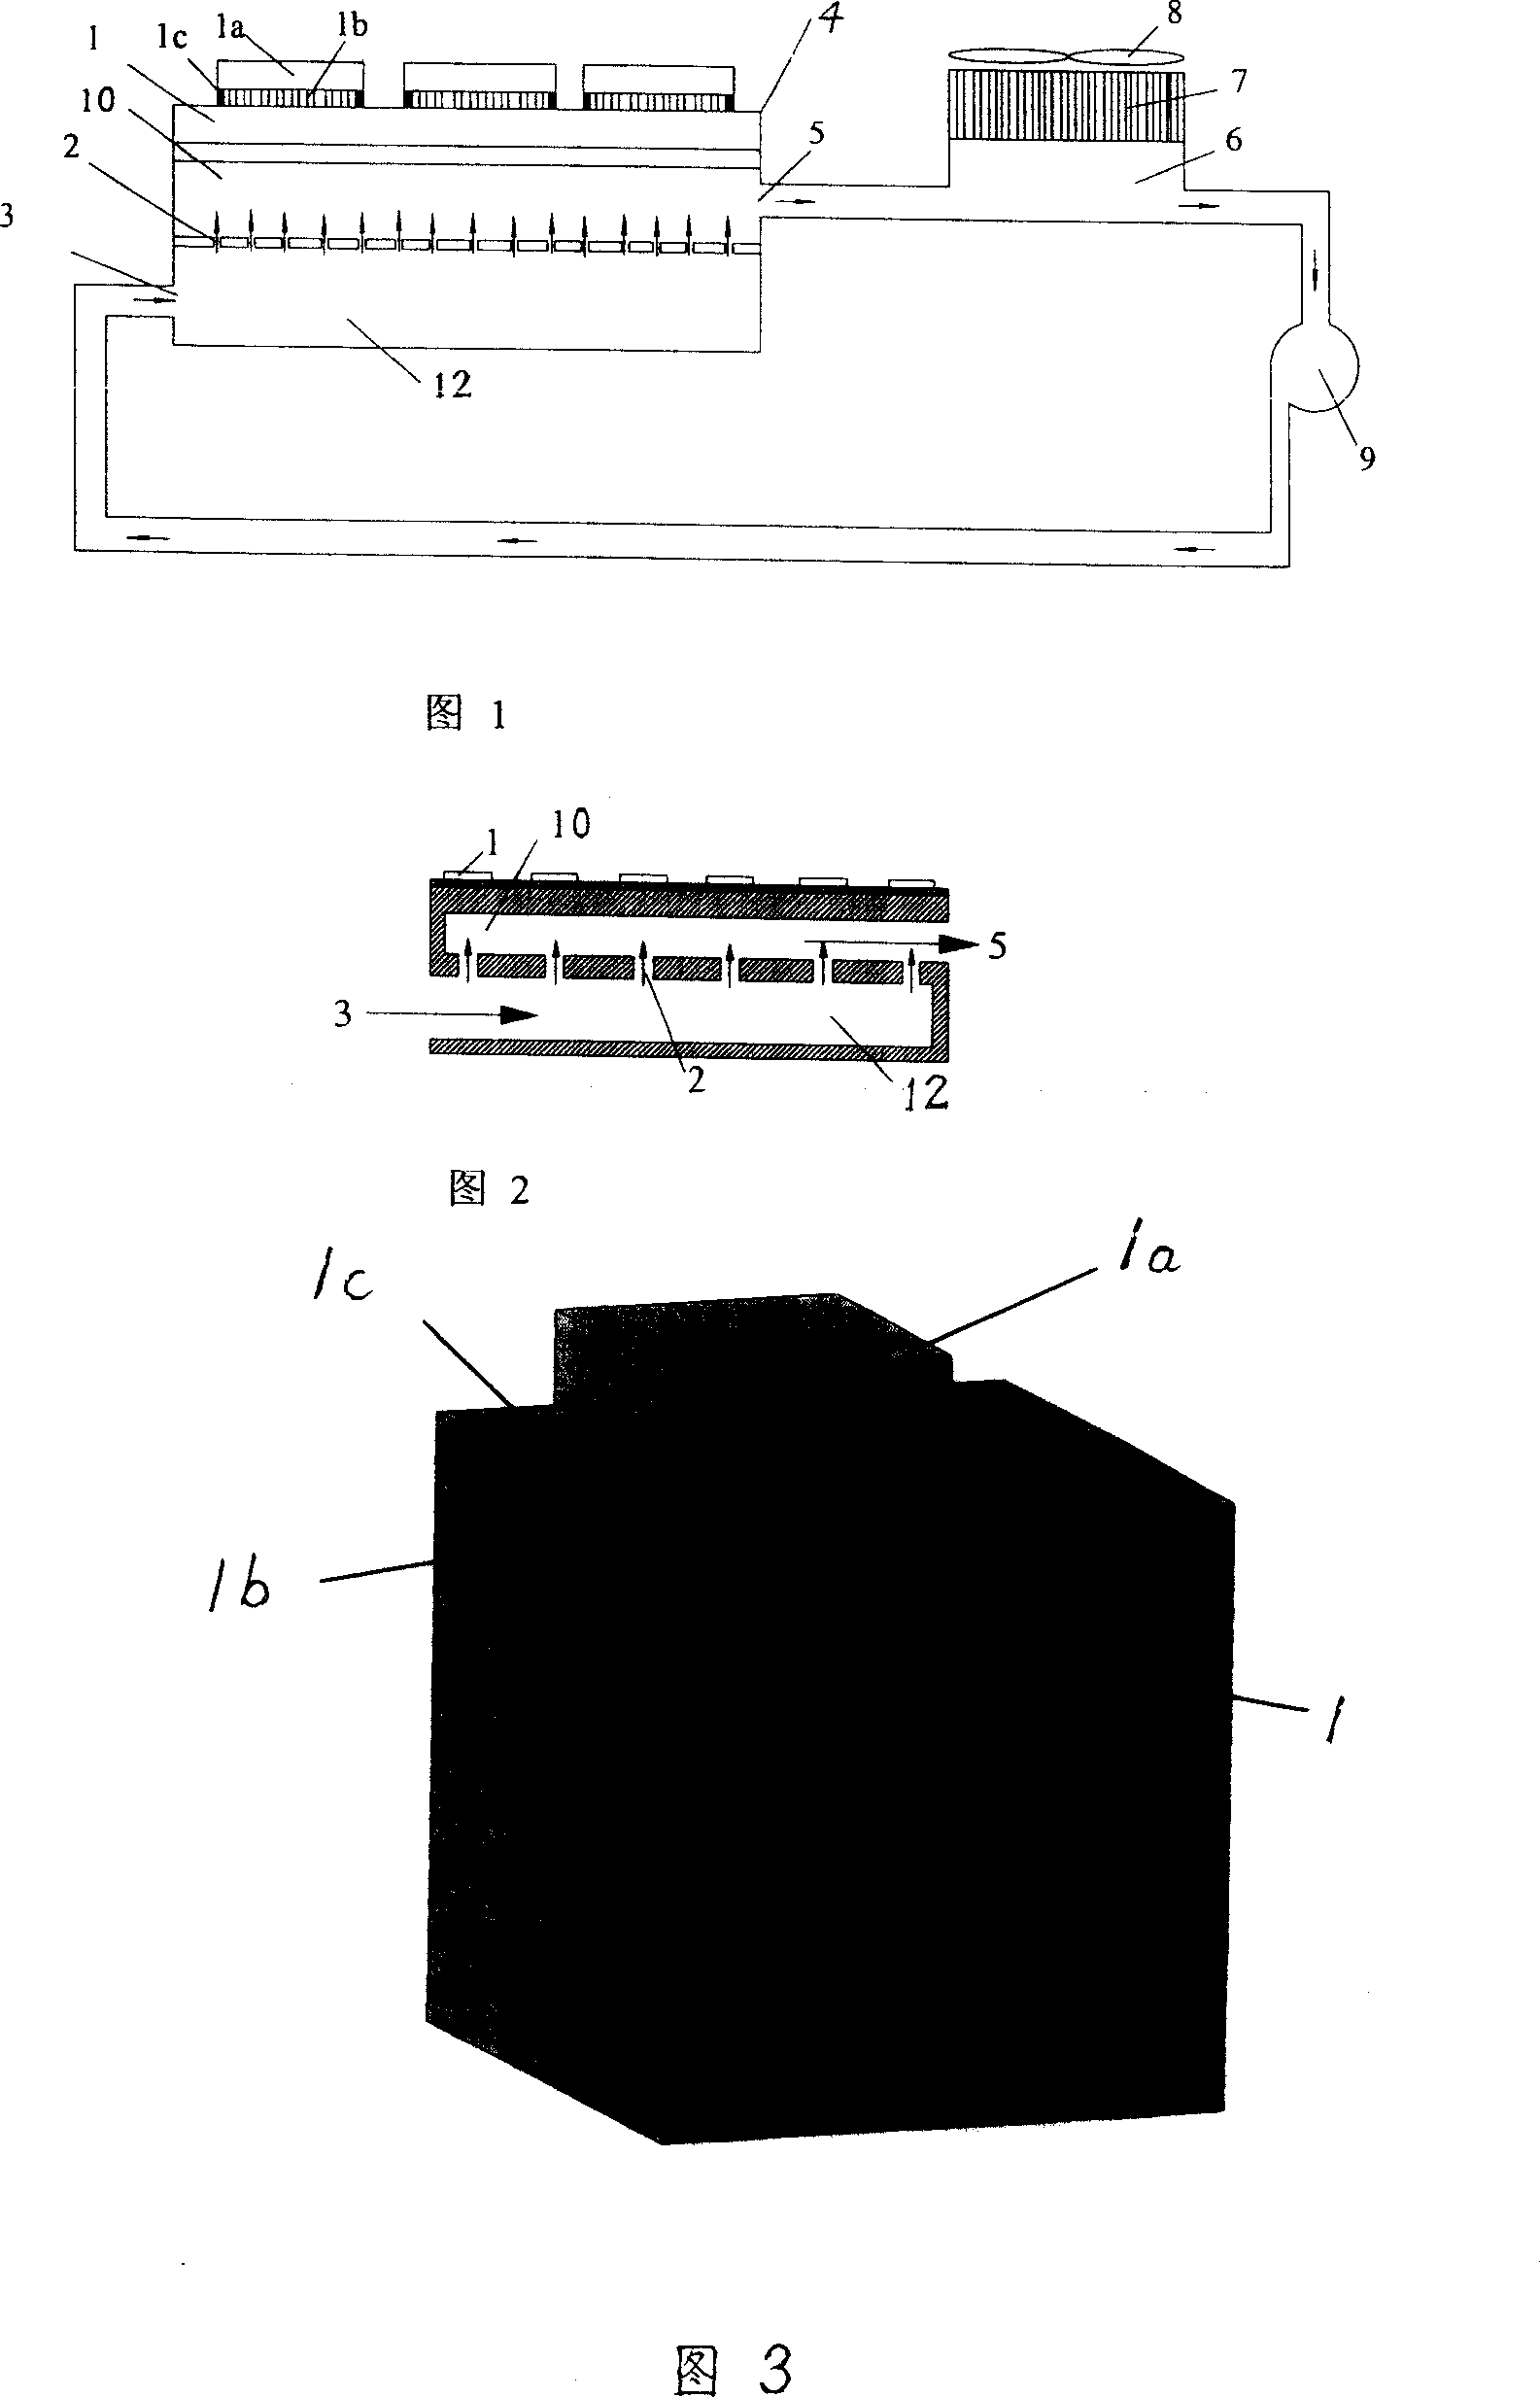 Micro jet flow cooling system for electronic device